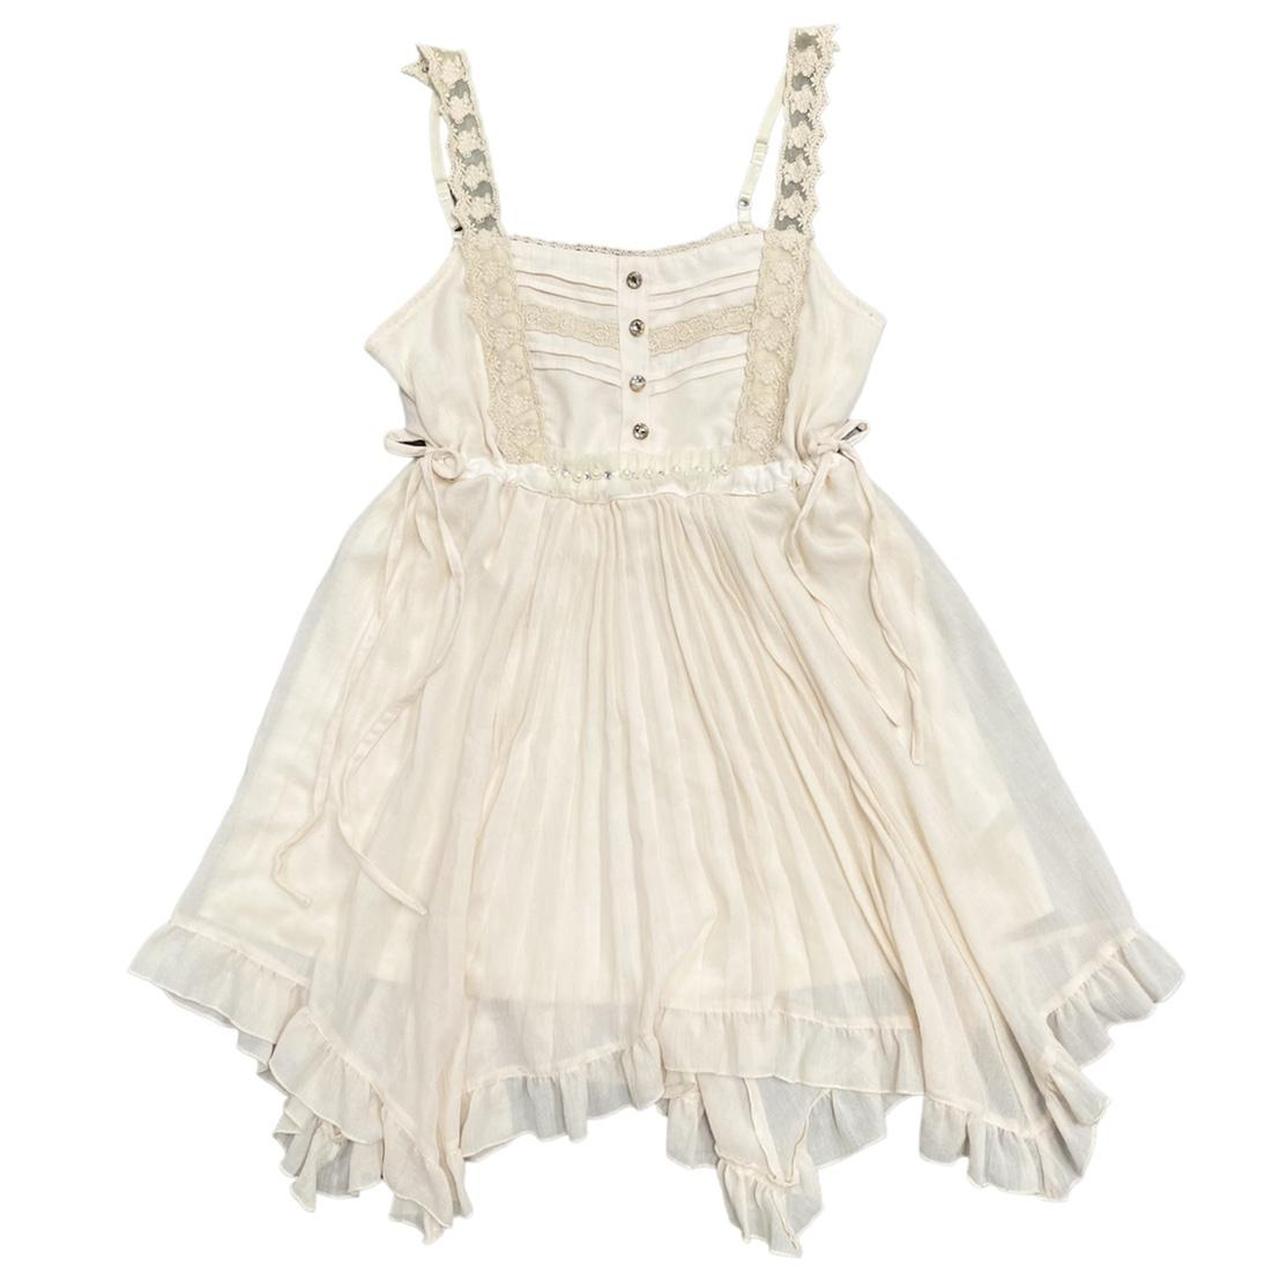 unreal coquette milkmaid babydoll dress by Axes... - Depop